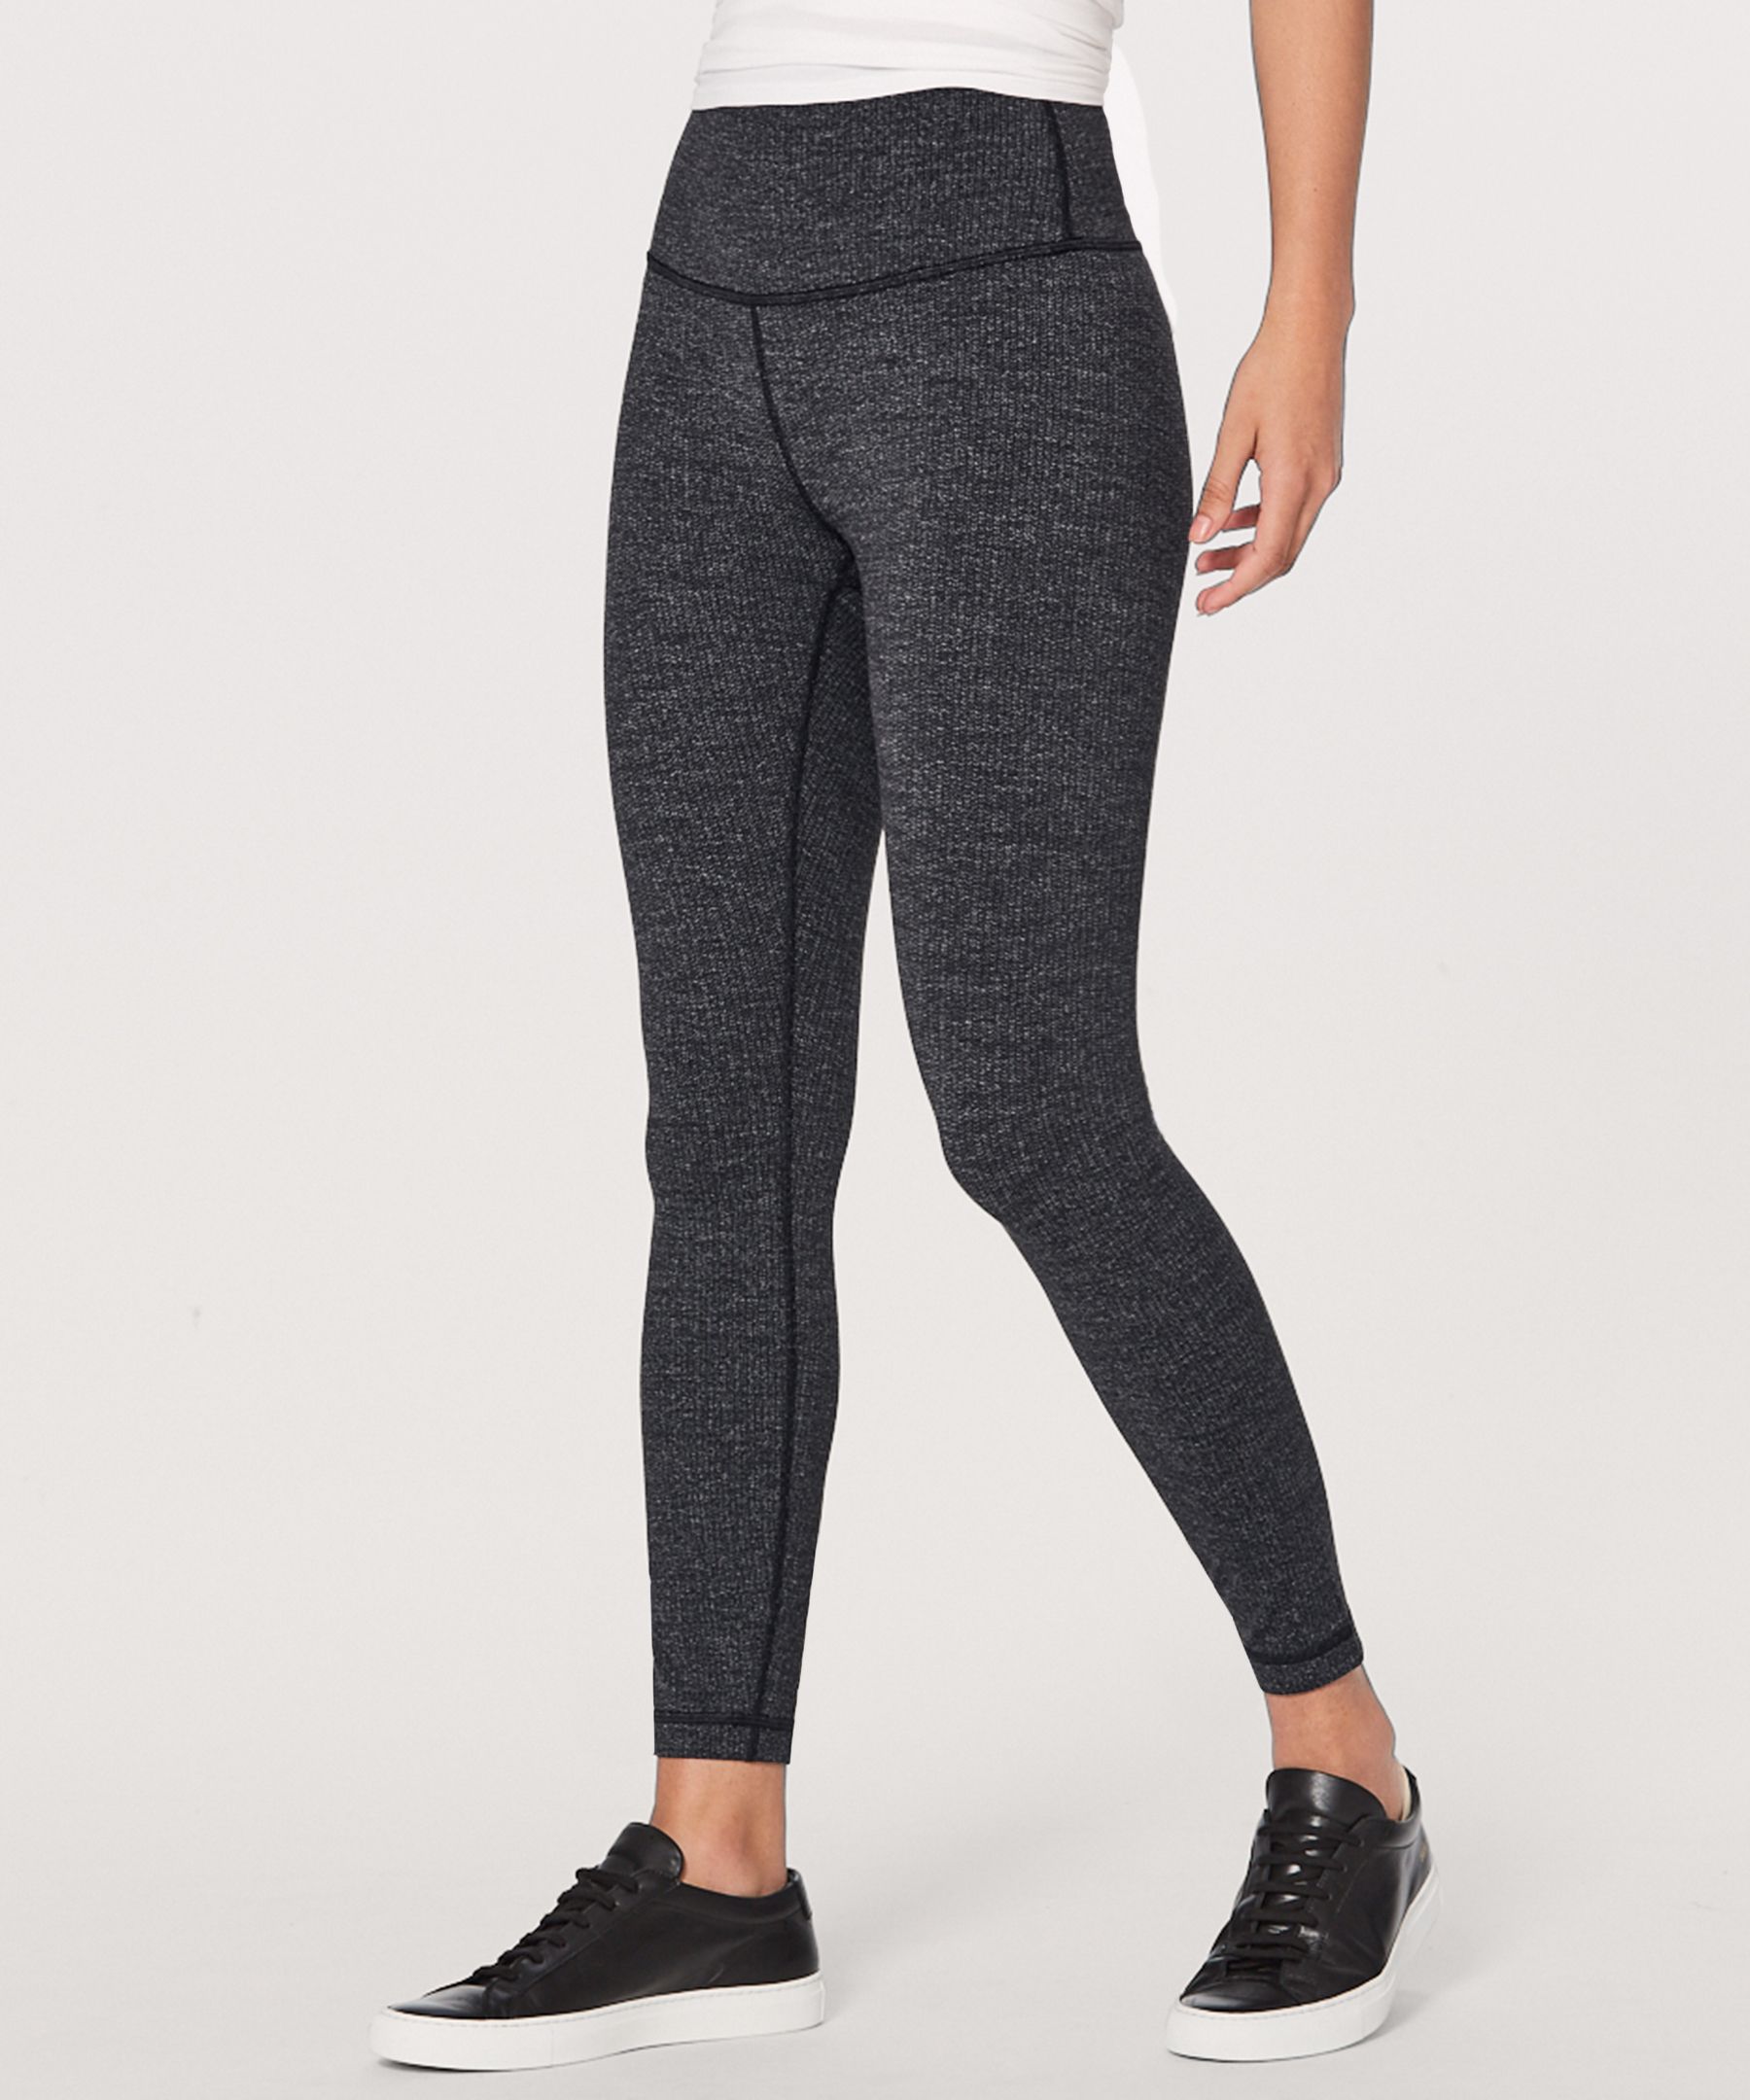 Lululemon Wunder Under High-rise Tights 25" Luon In Black